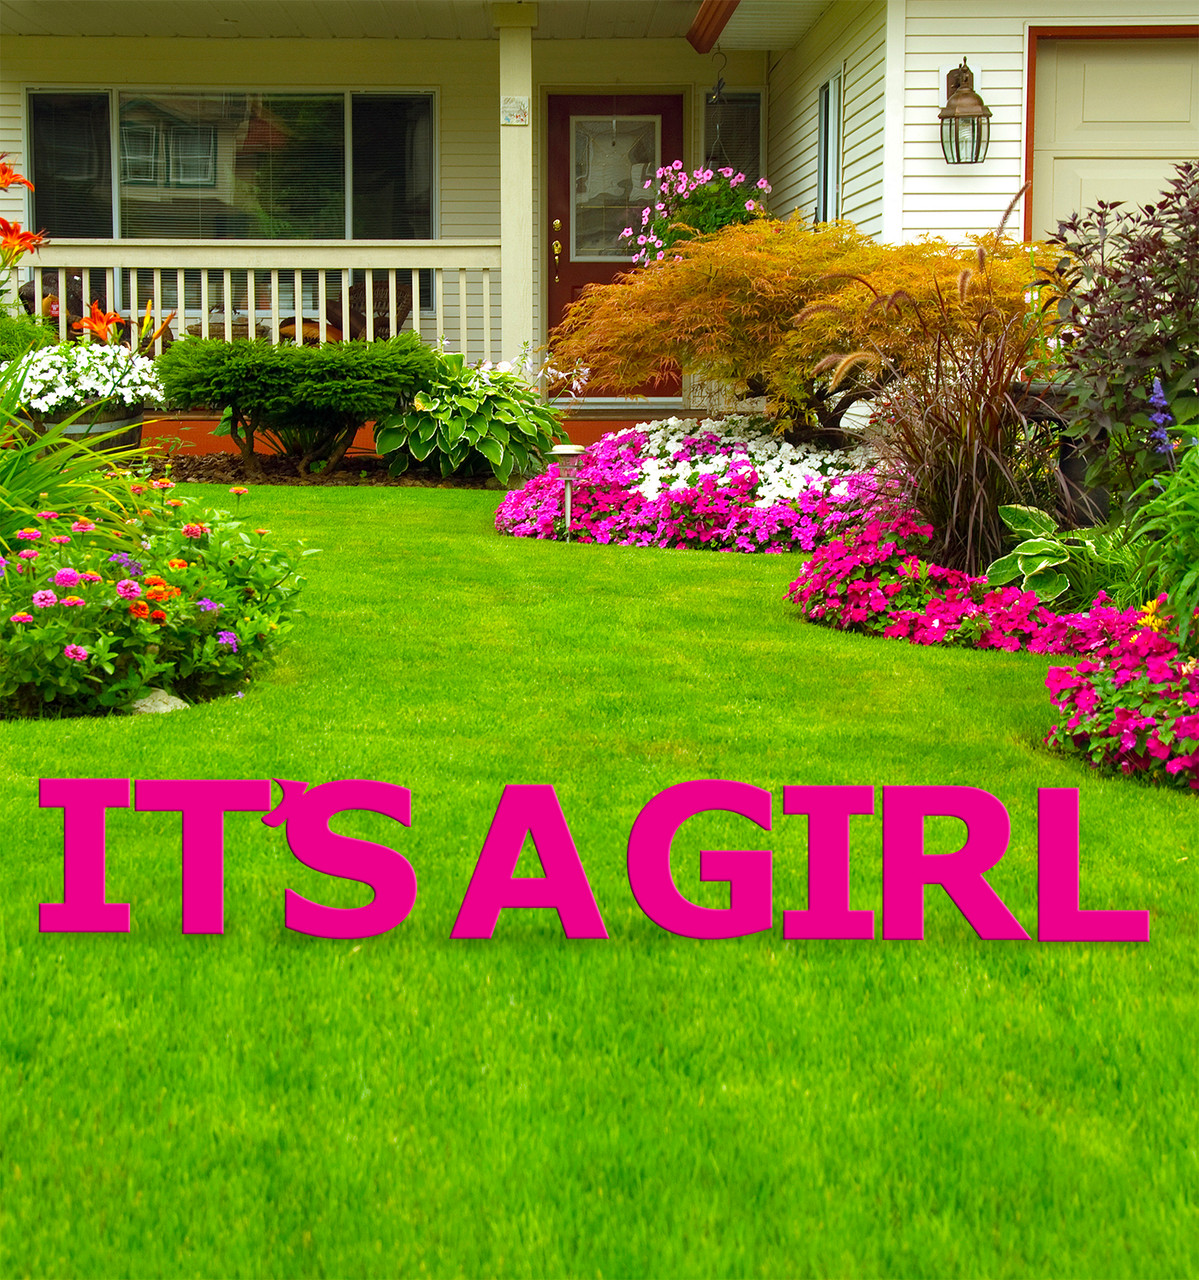 It's a Girl Yard Sign Letter Set.